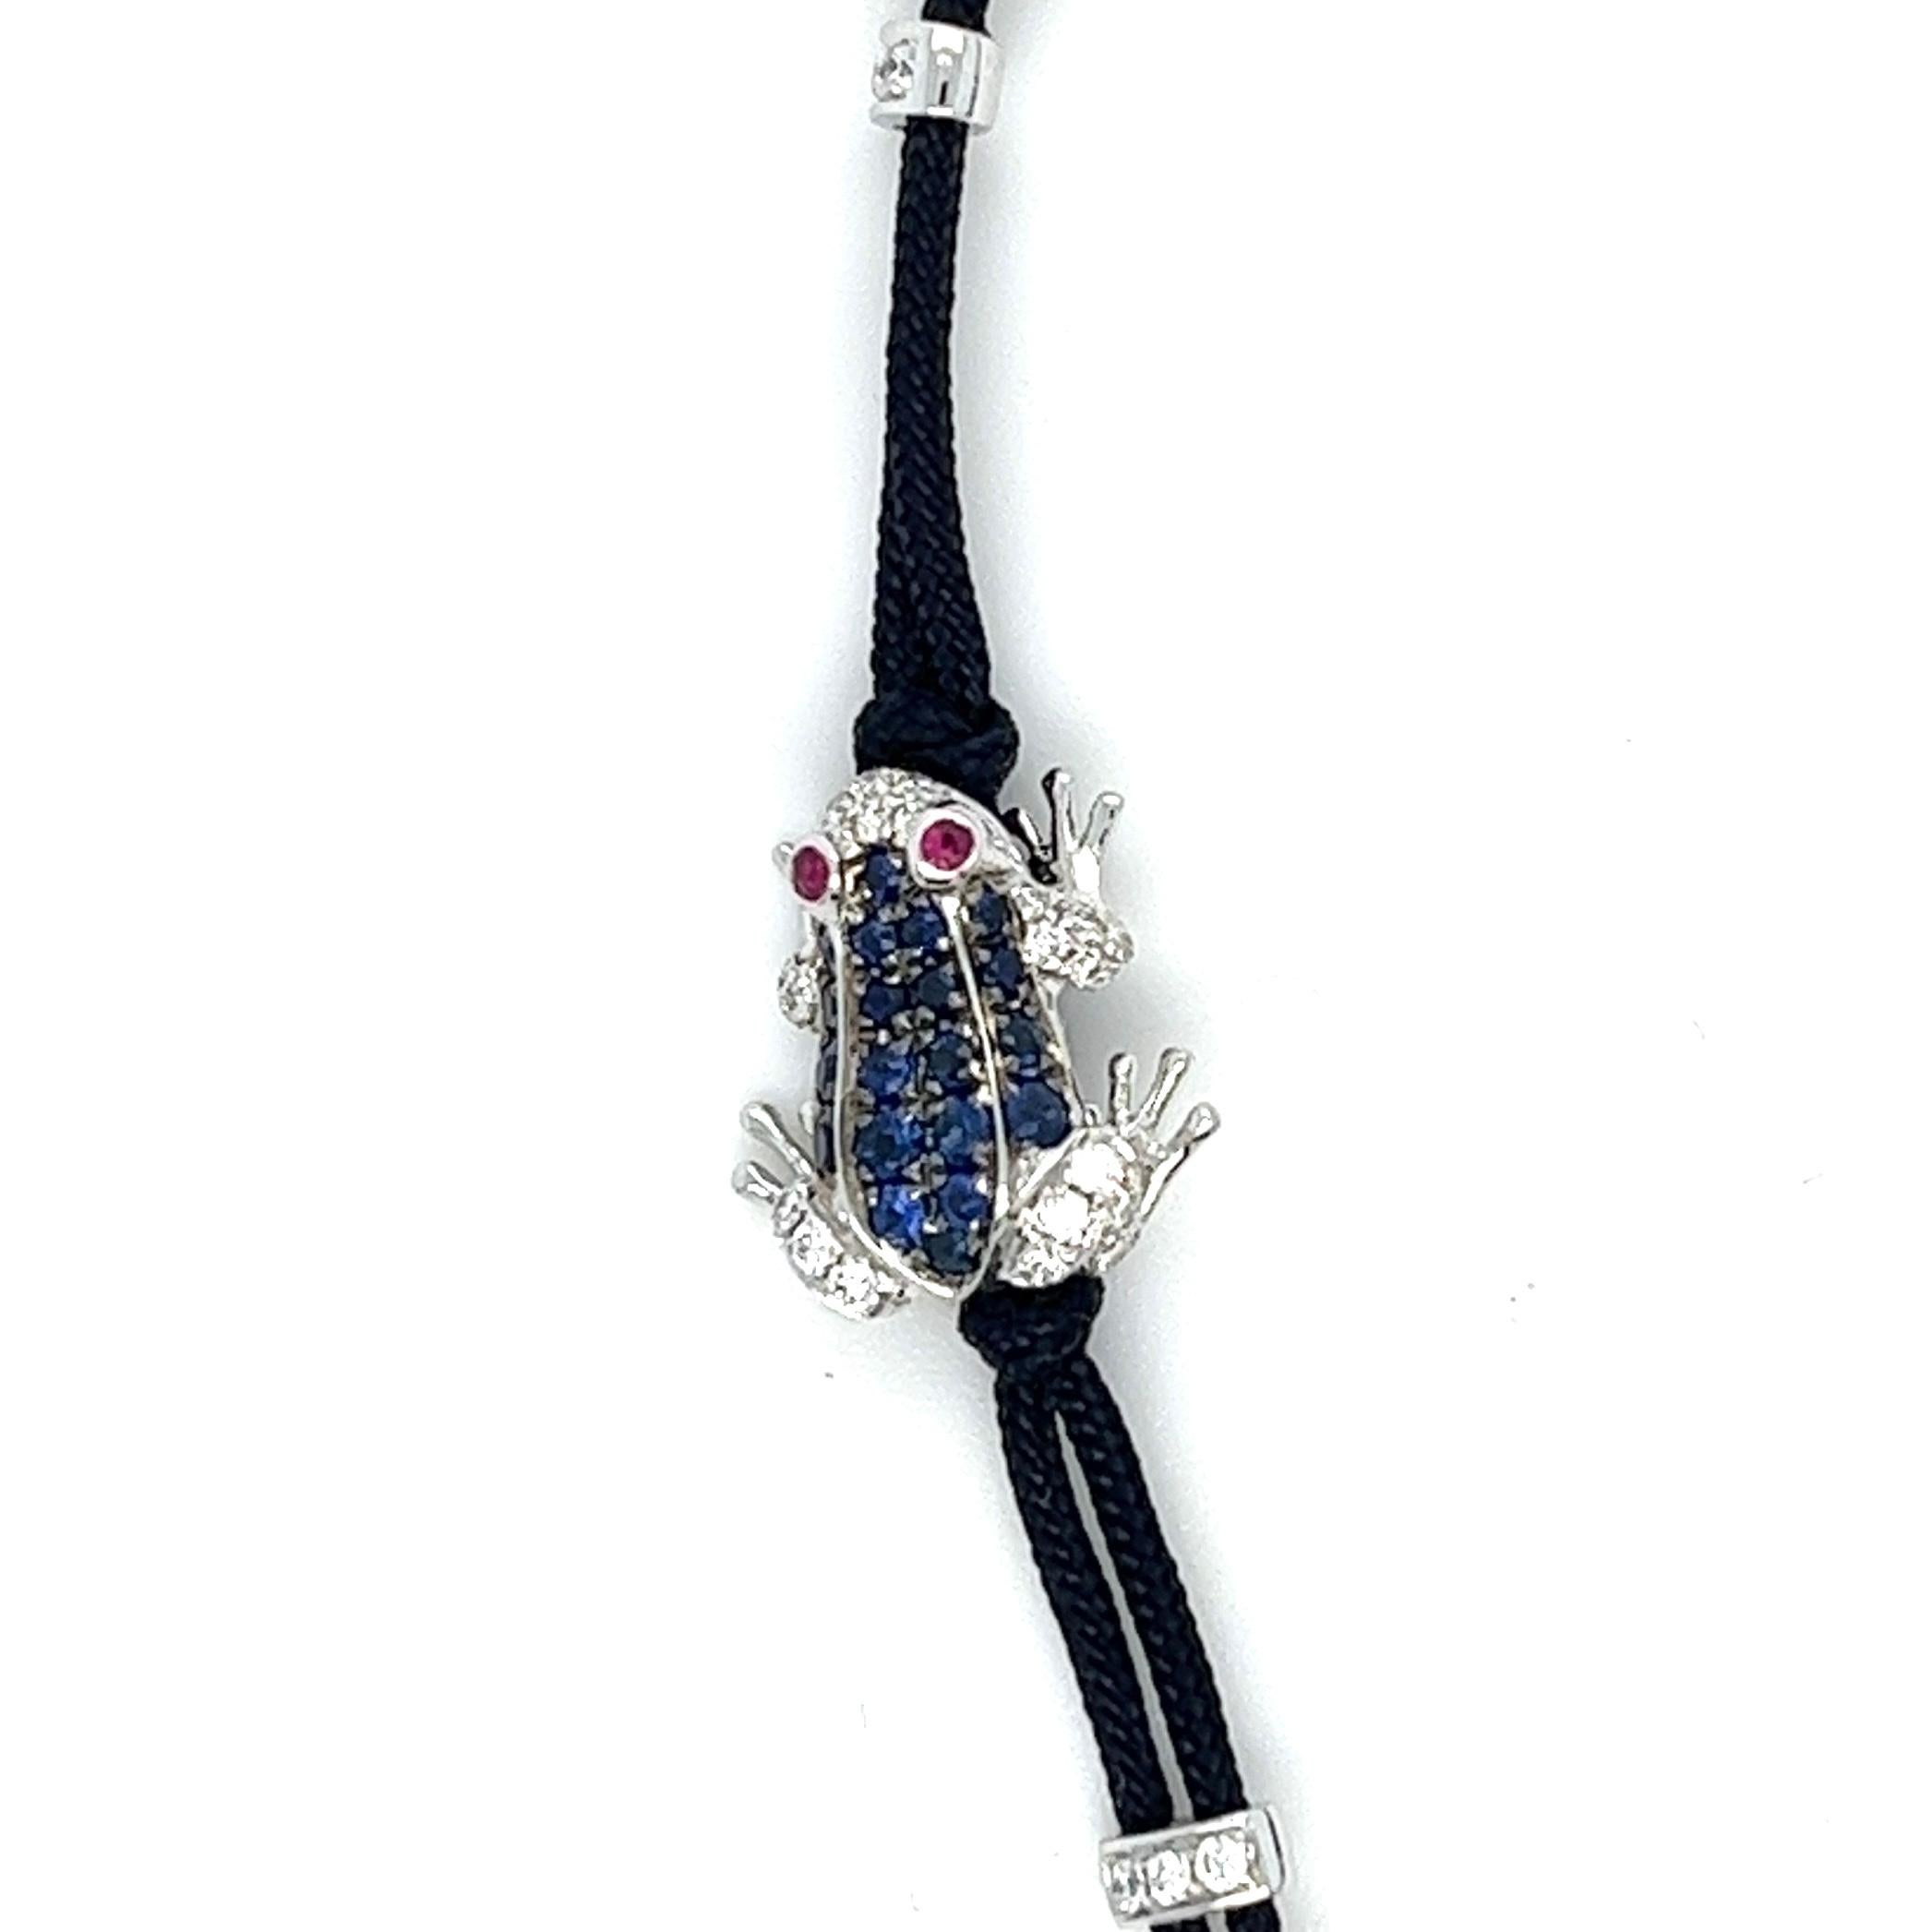 18K White Gold Sapphire Frog Woven Bracelet with Diamonds & Rubies

2 Rubies - 0.02 CT
20 Sapphires - 0.20 CT
37 Diamonds - 0.16 CT
18K White Gold - 2.50 GM

This exquisite braided bracelet features a stunning frog made of rubies, set in 18K gold,